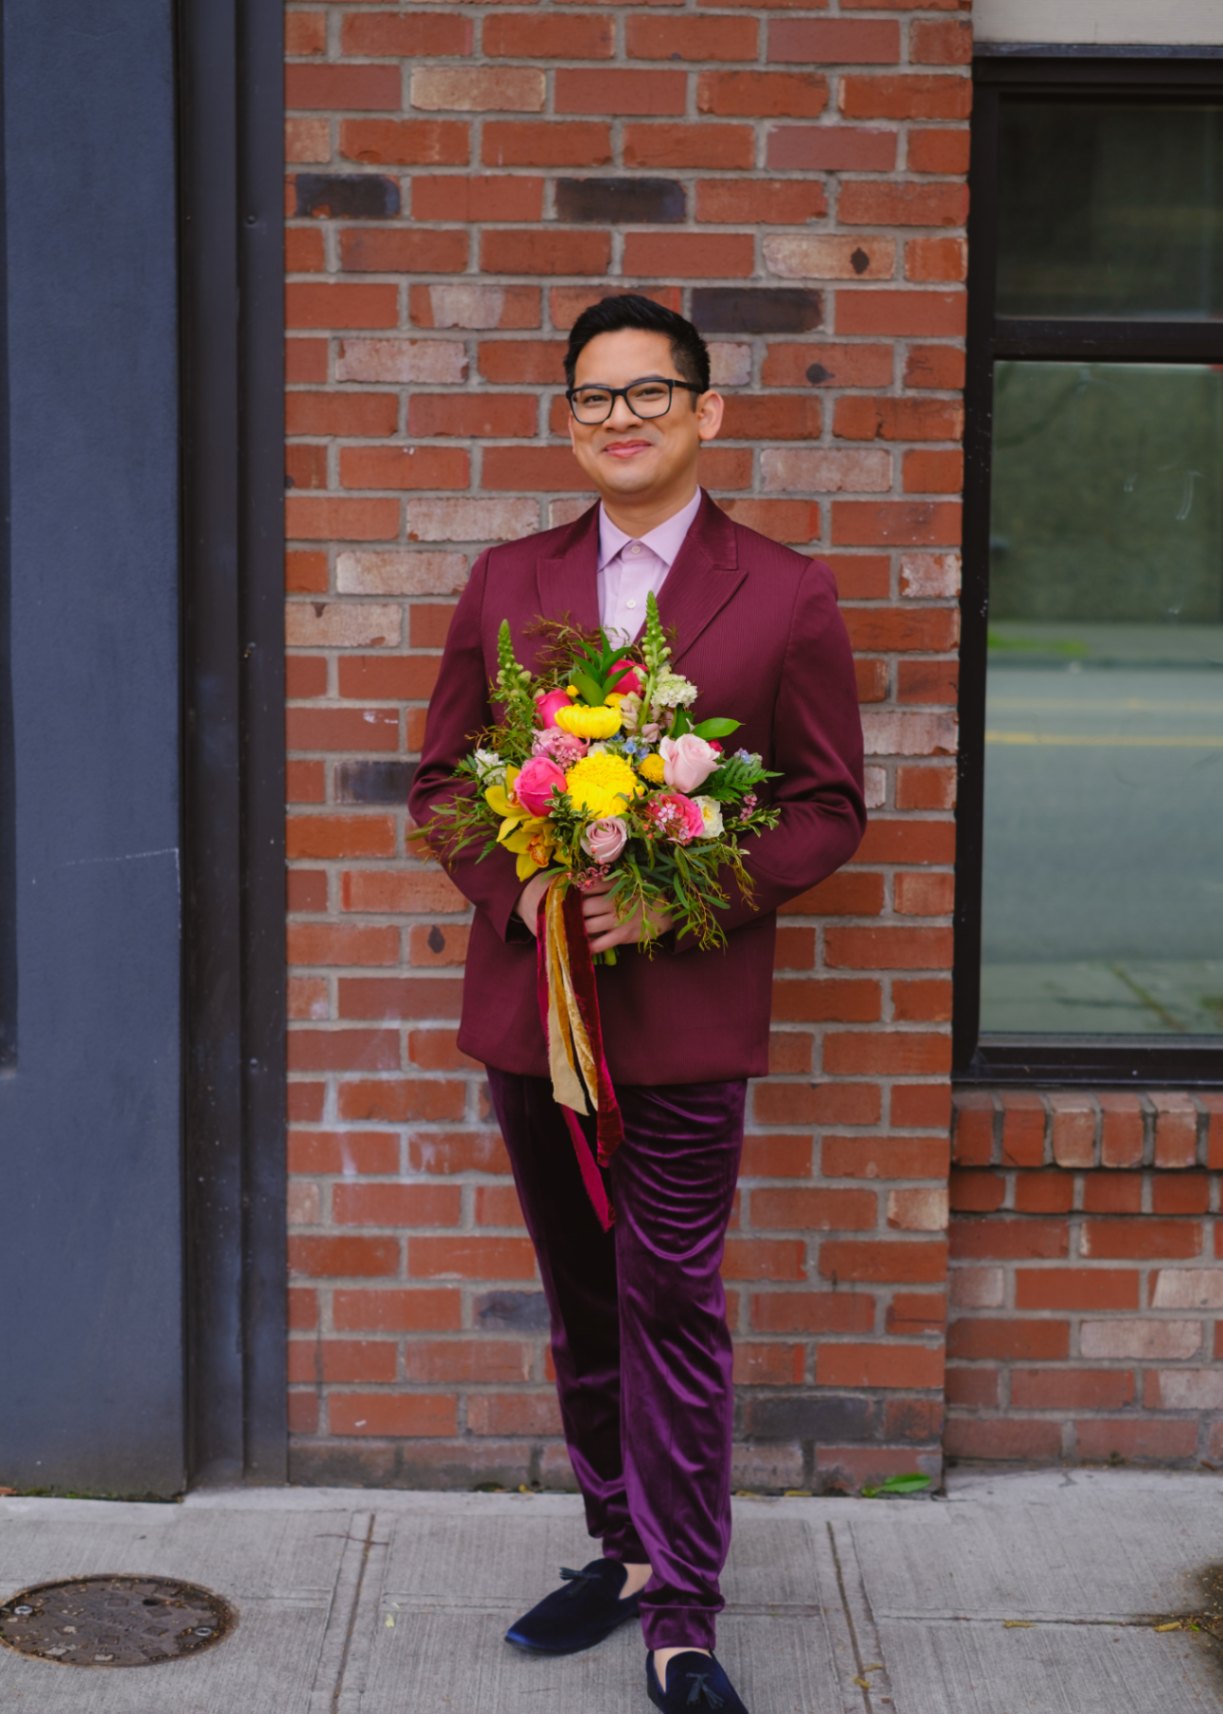 Seattle queer wedding styled shoot featuring a queer marrier wearing burgundy, pink and purple holding a colorful bouquet